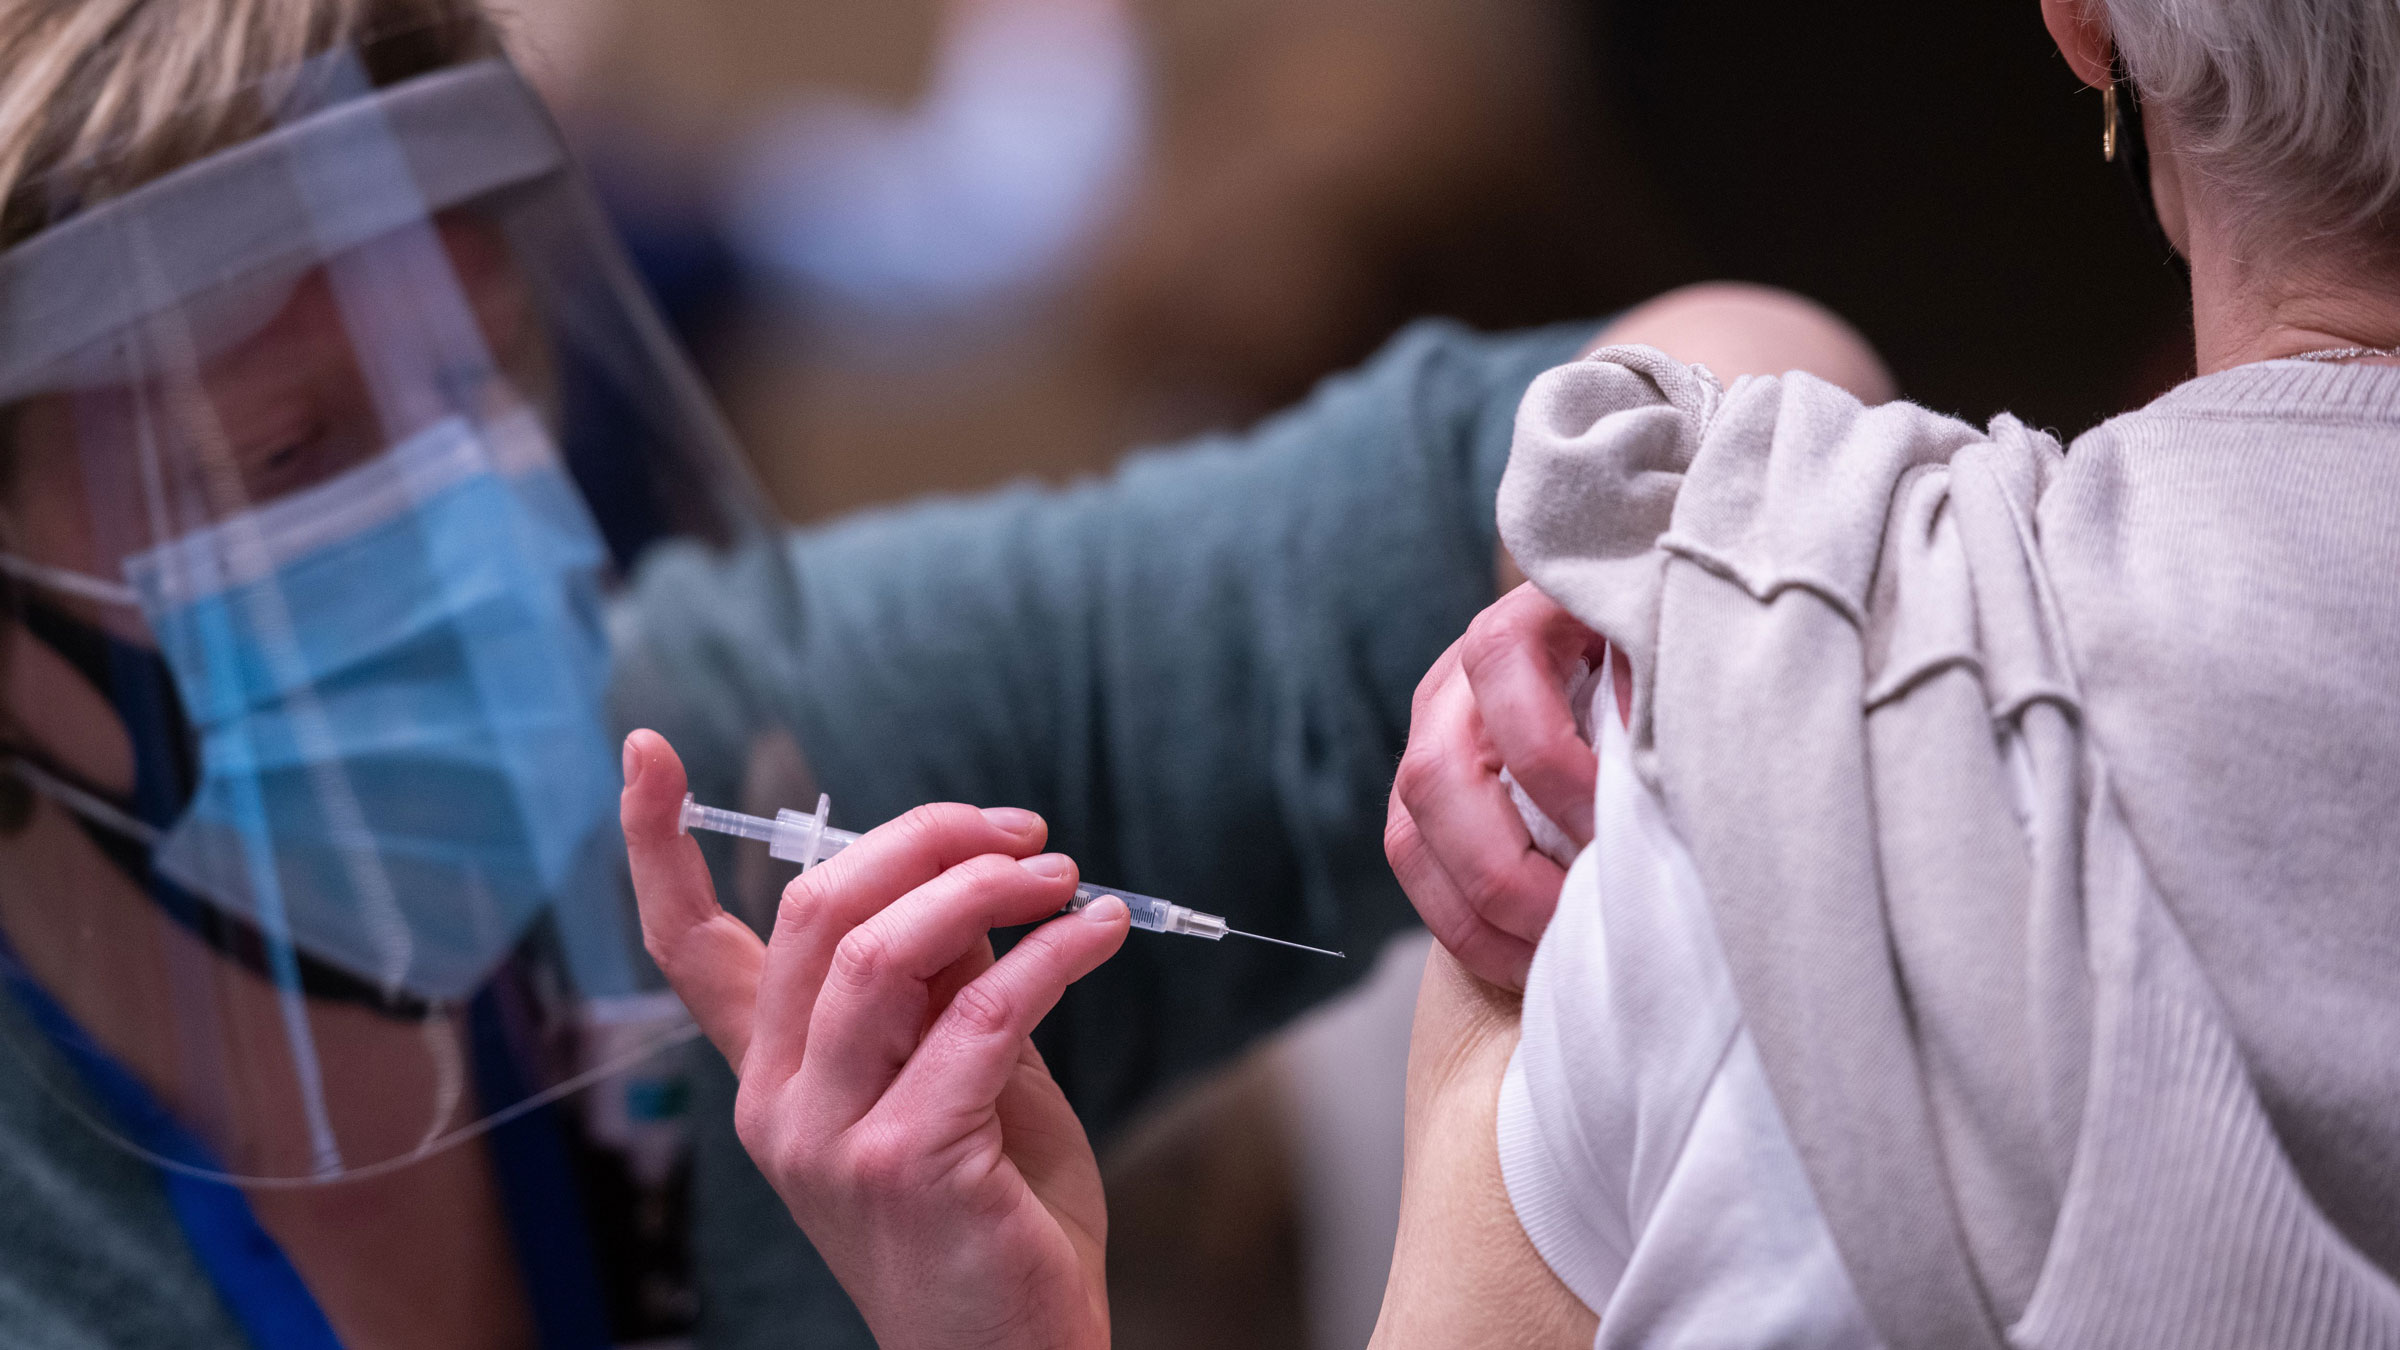 Advanced registered nurse practitioner Erin Forsythe administers a Covid-19 vaccine at a pop-up clinic in Seattle on Sunday.